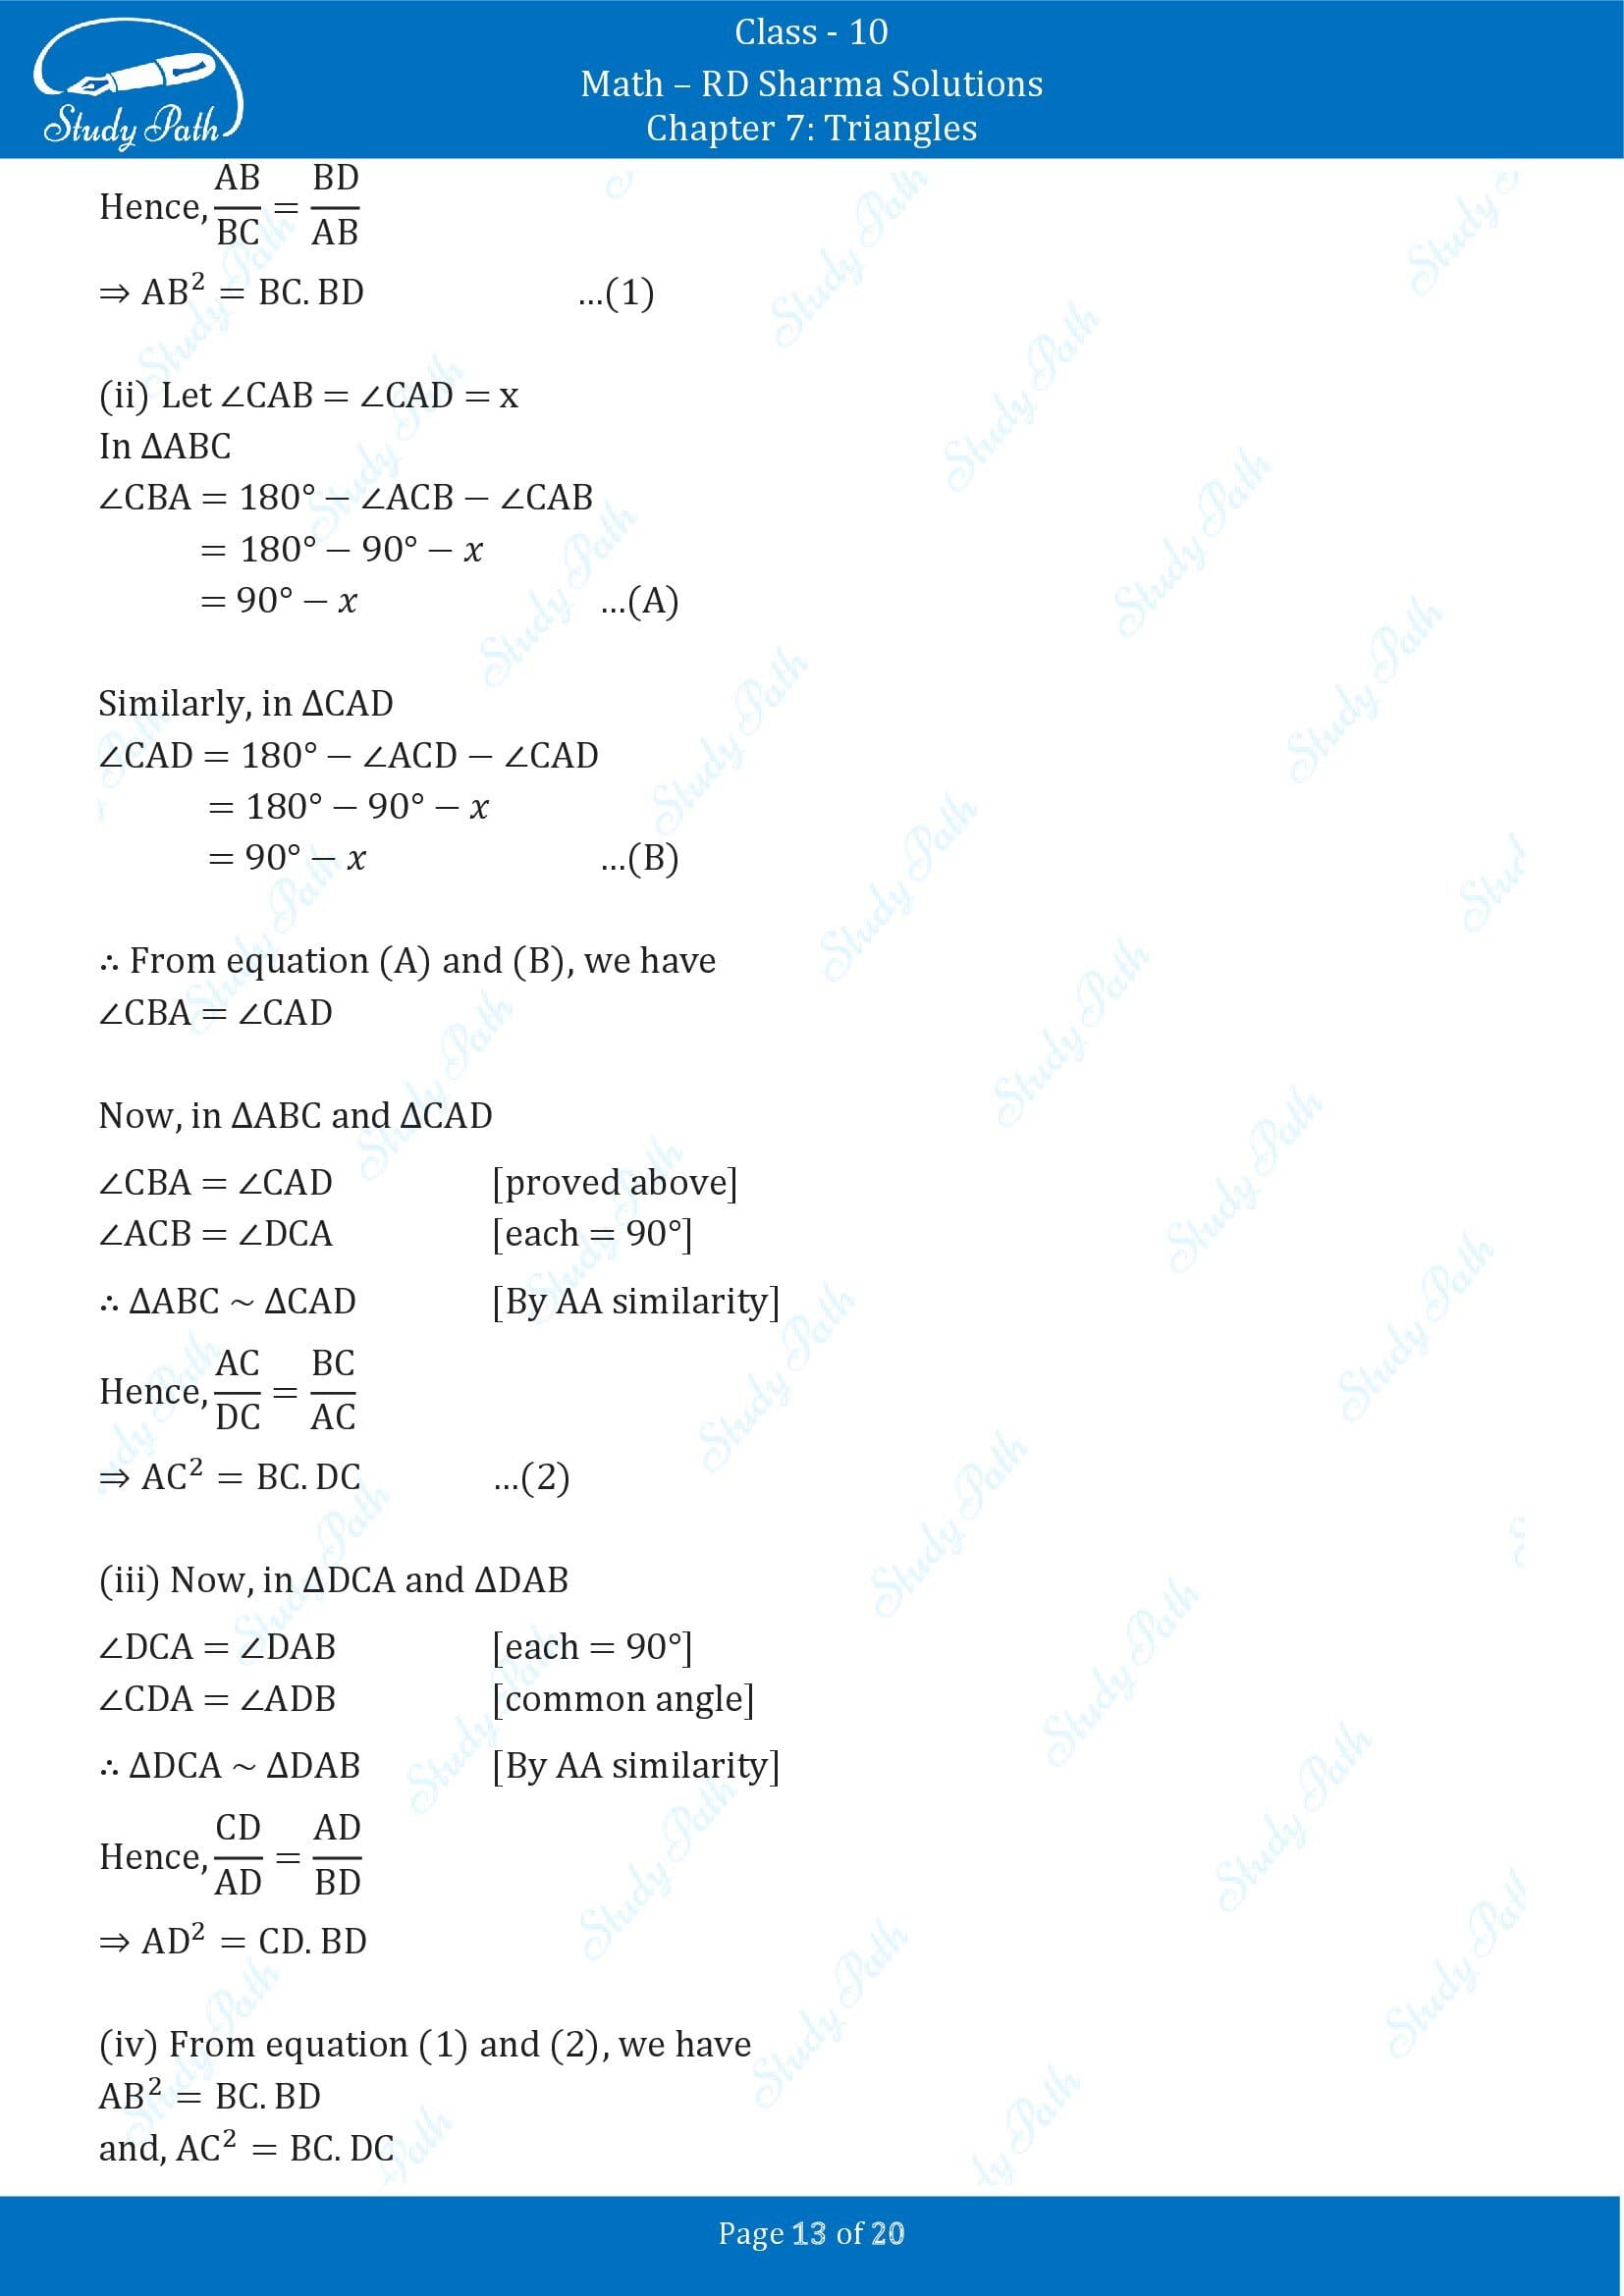 RD Sharma Solutions Class 10 Chapter 7 Triangles Exercise 7.7 00013